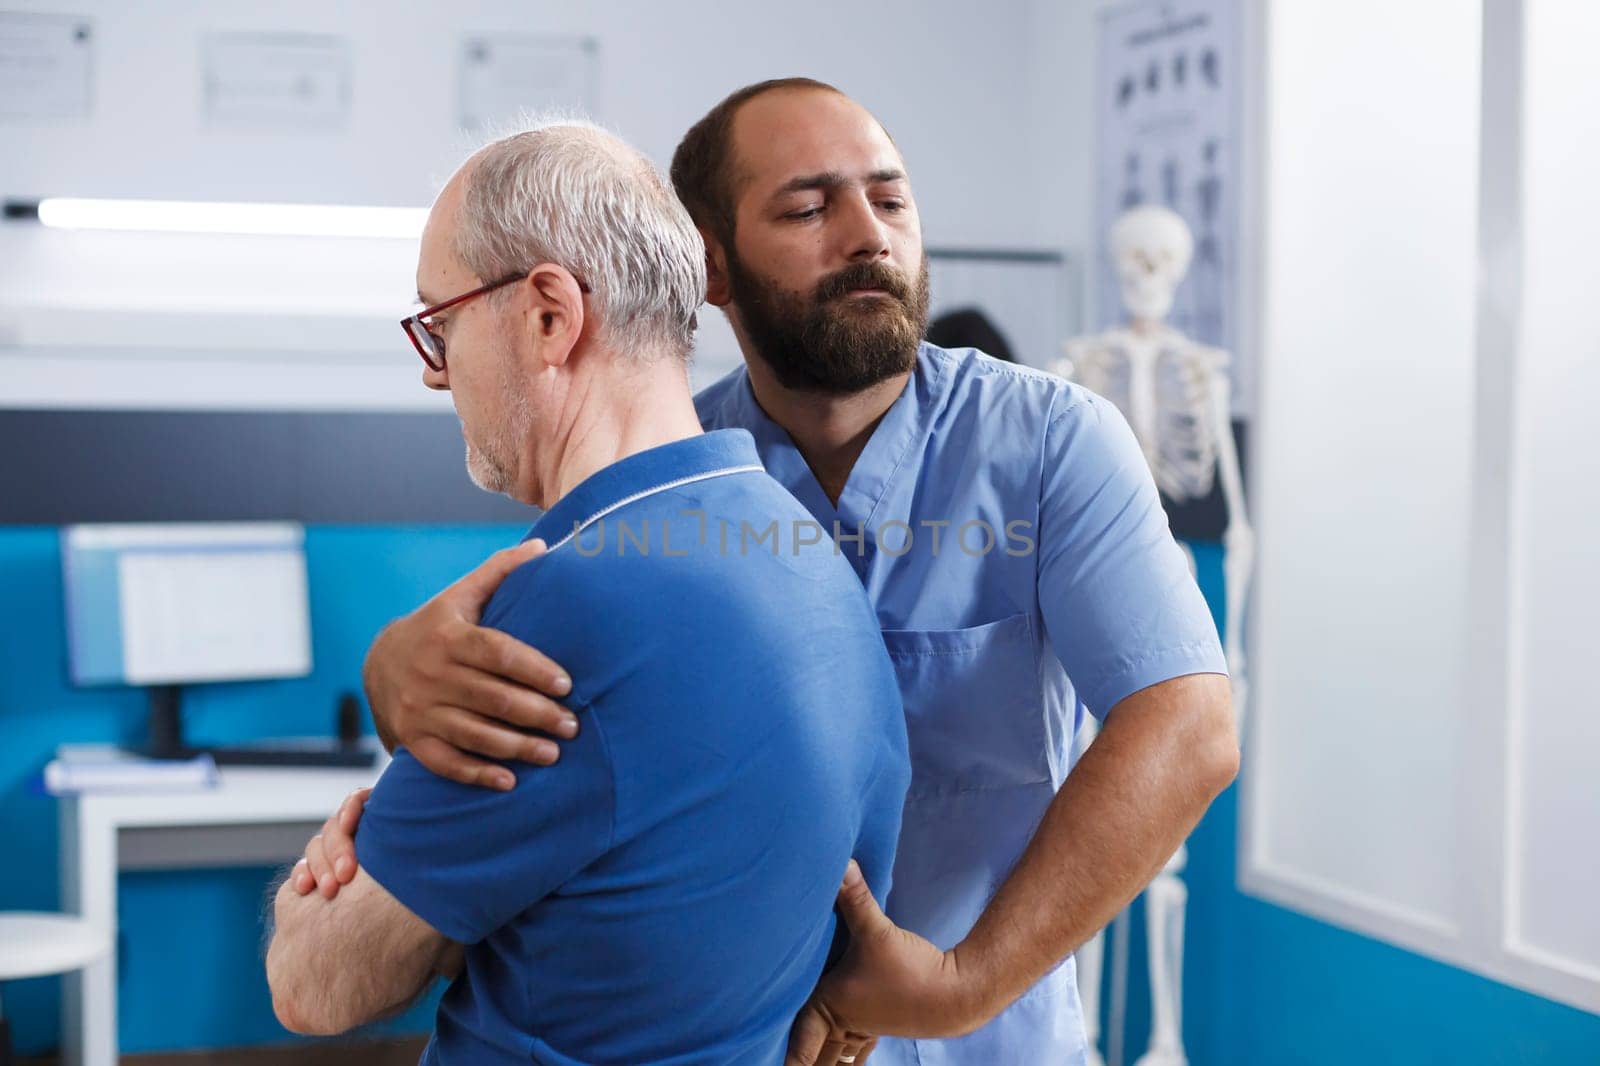 Nurse helps man with chiropractic care by DCStudio